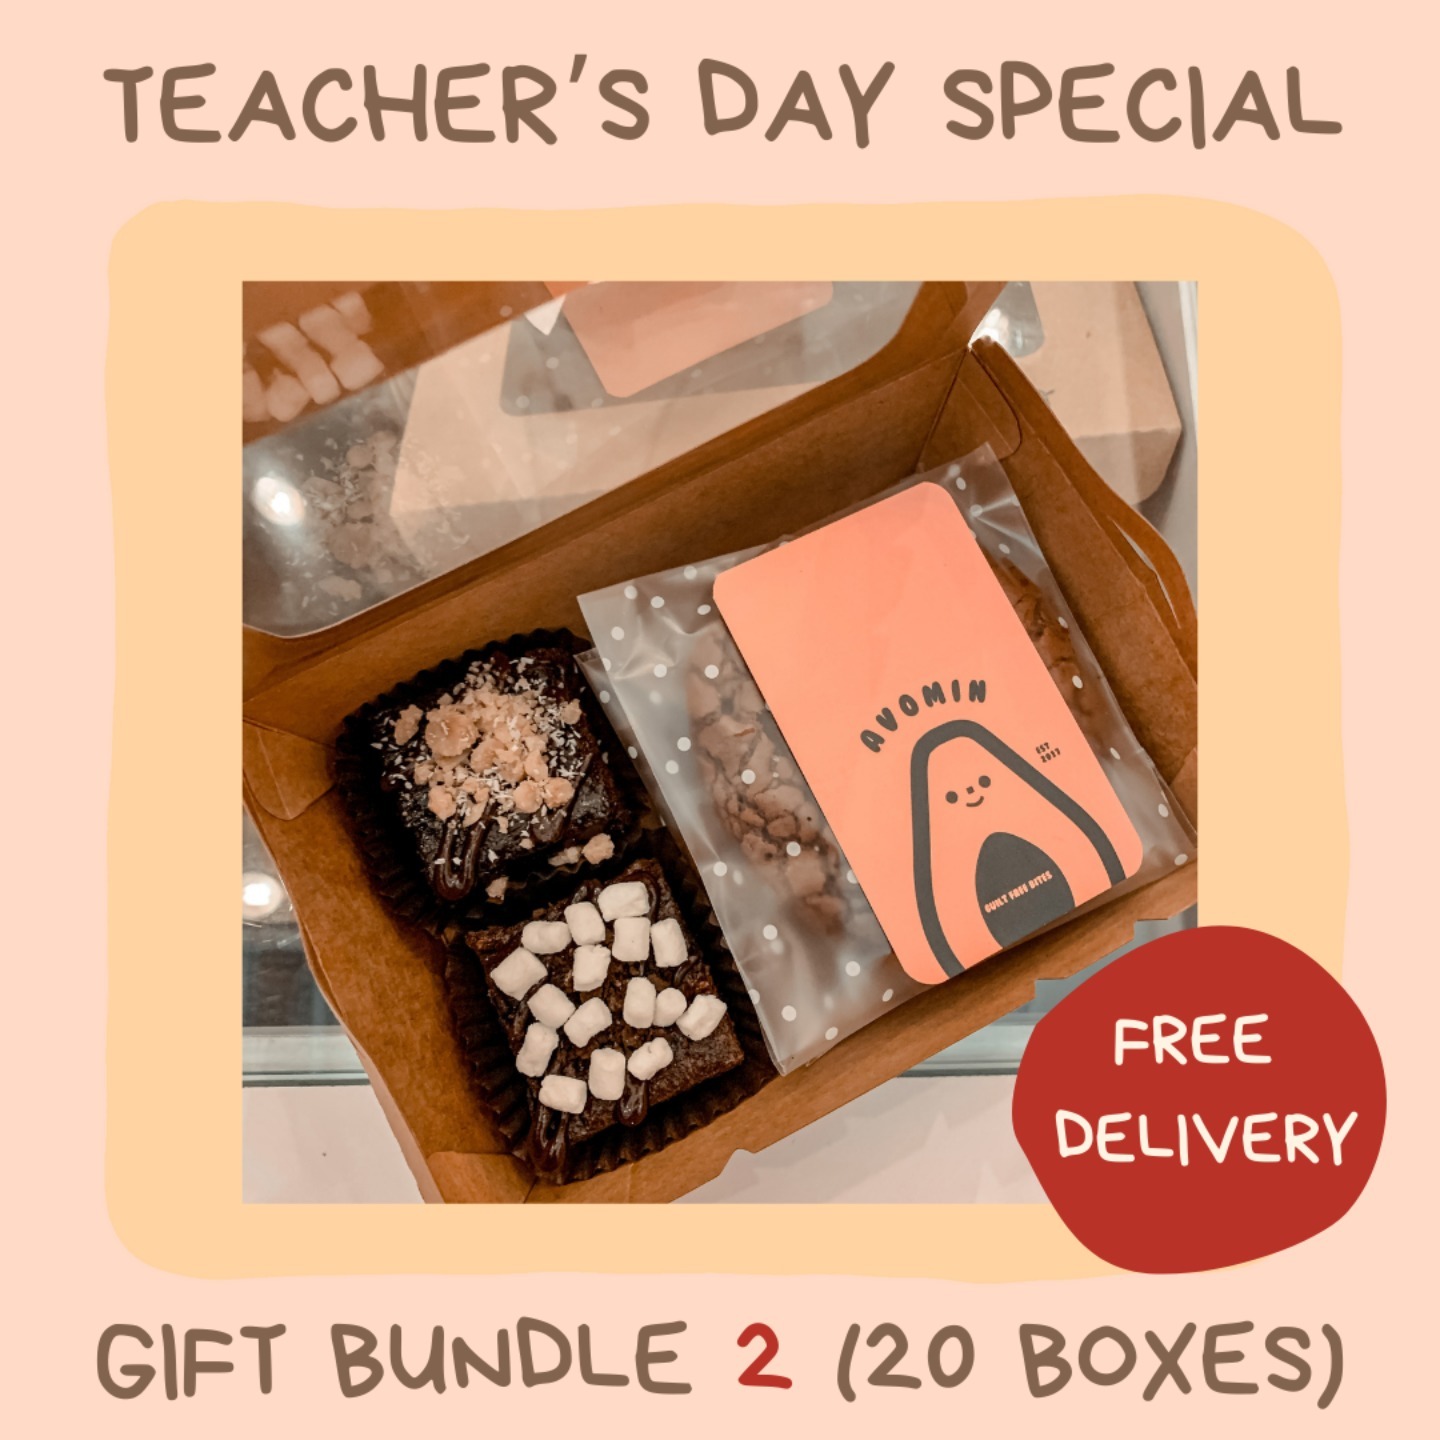 FREE DELIVERY GIFT BUNDLE 2  20 BOXES